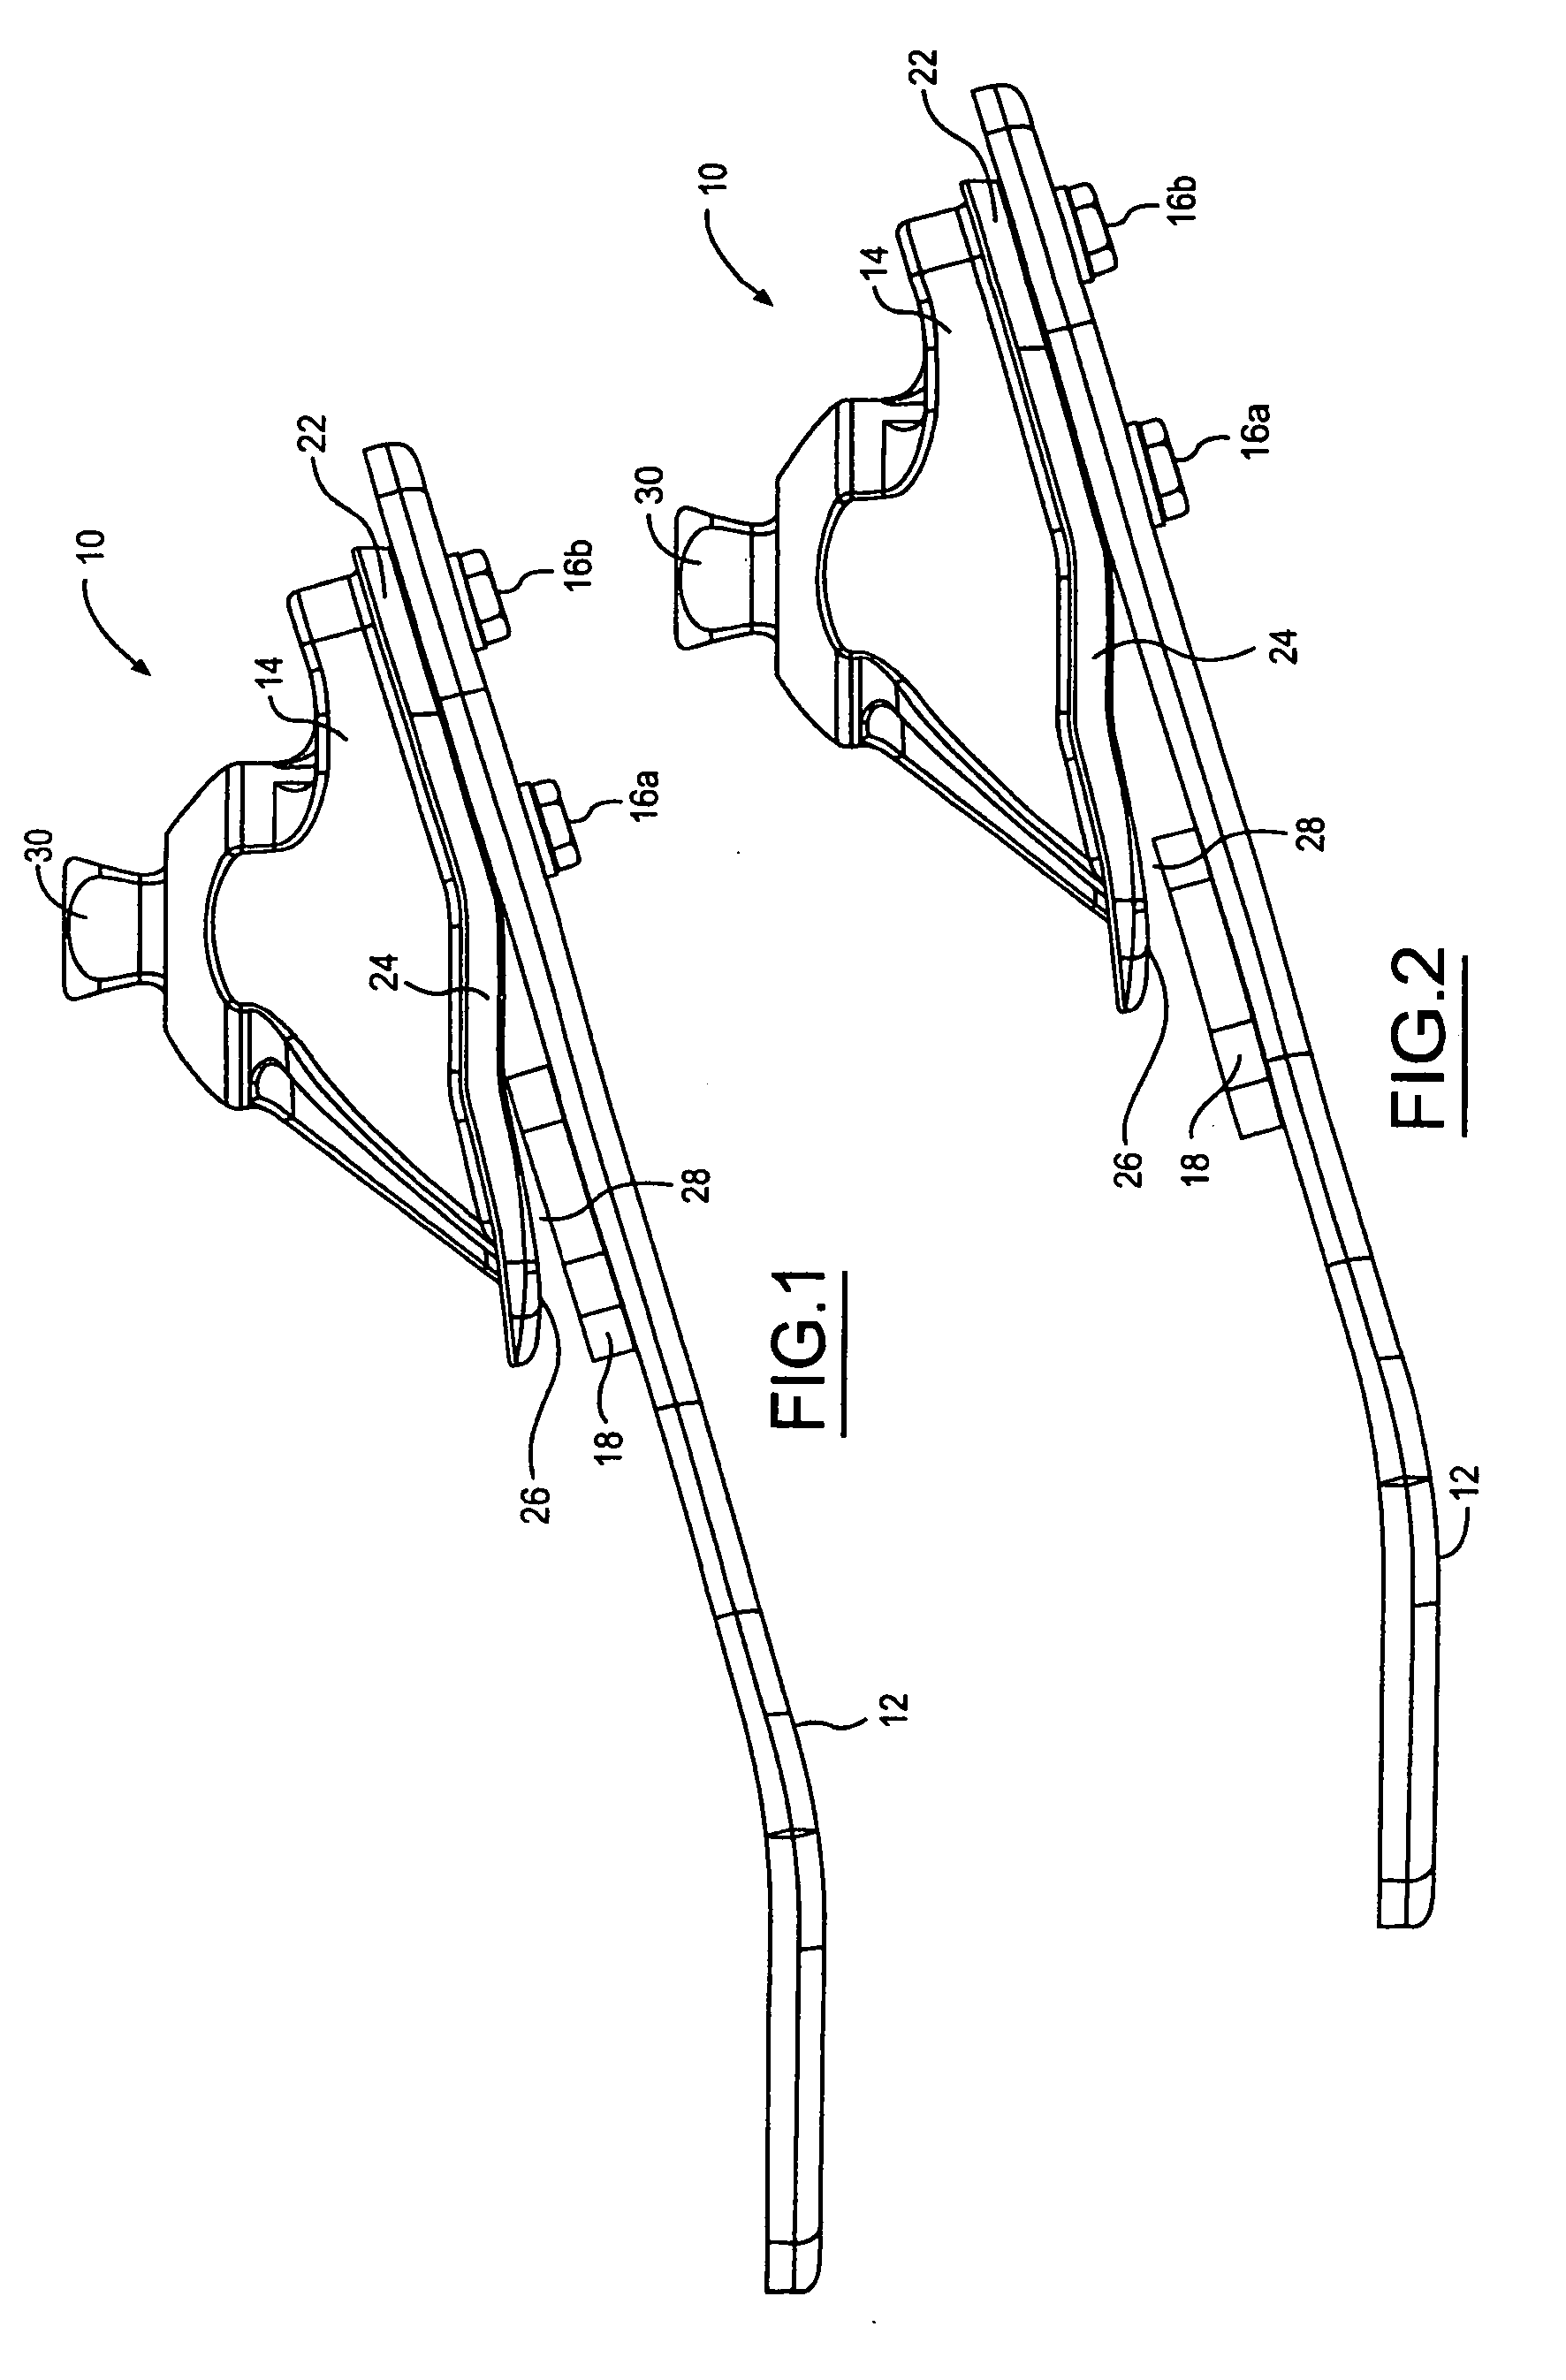 Sub-malleolar non-articulating prosthetic foot with improved dorsiflexion